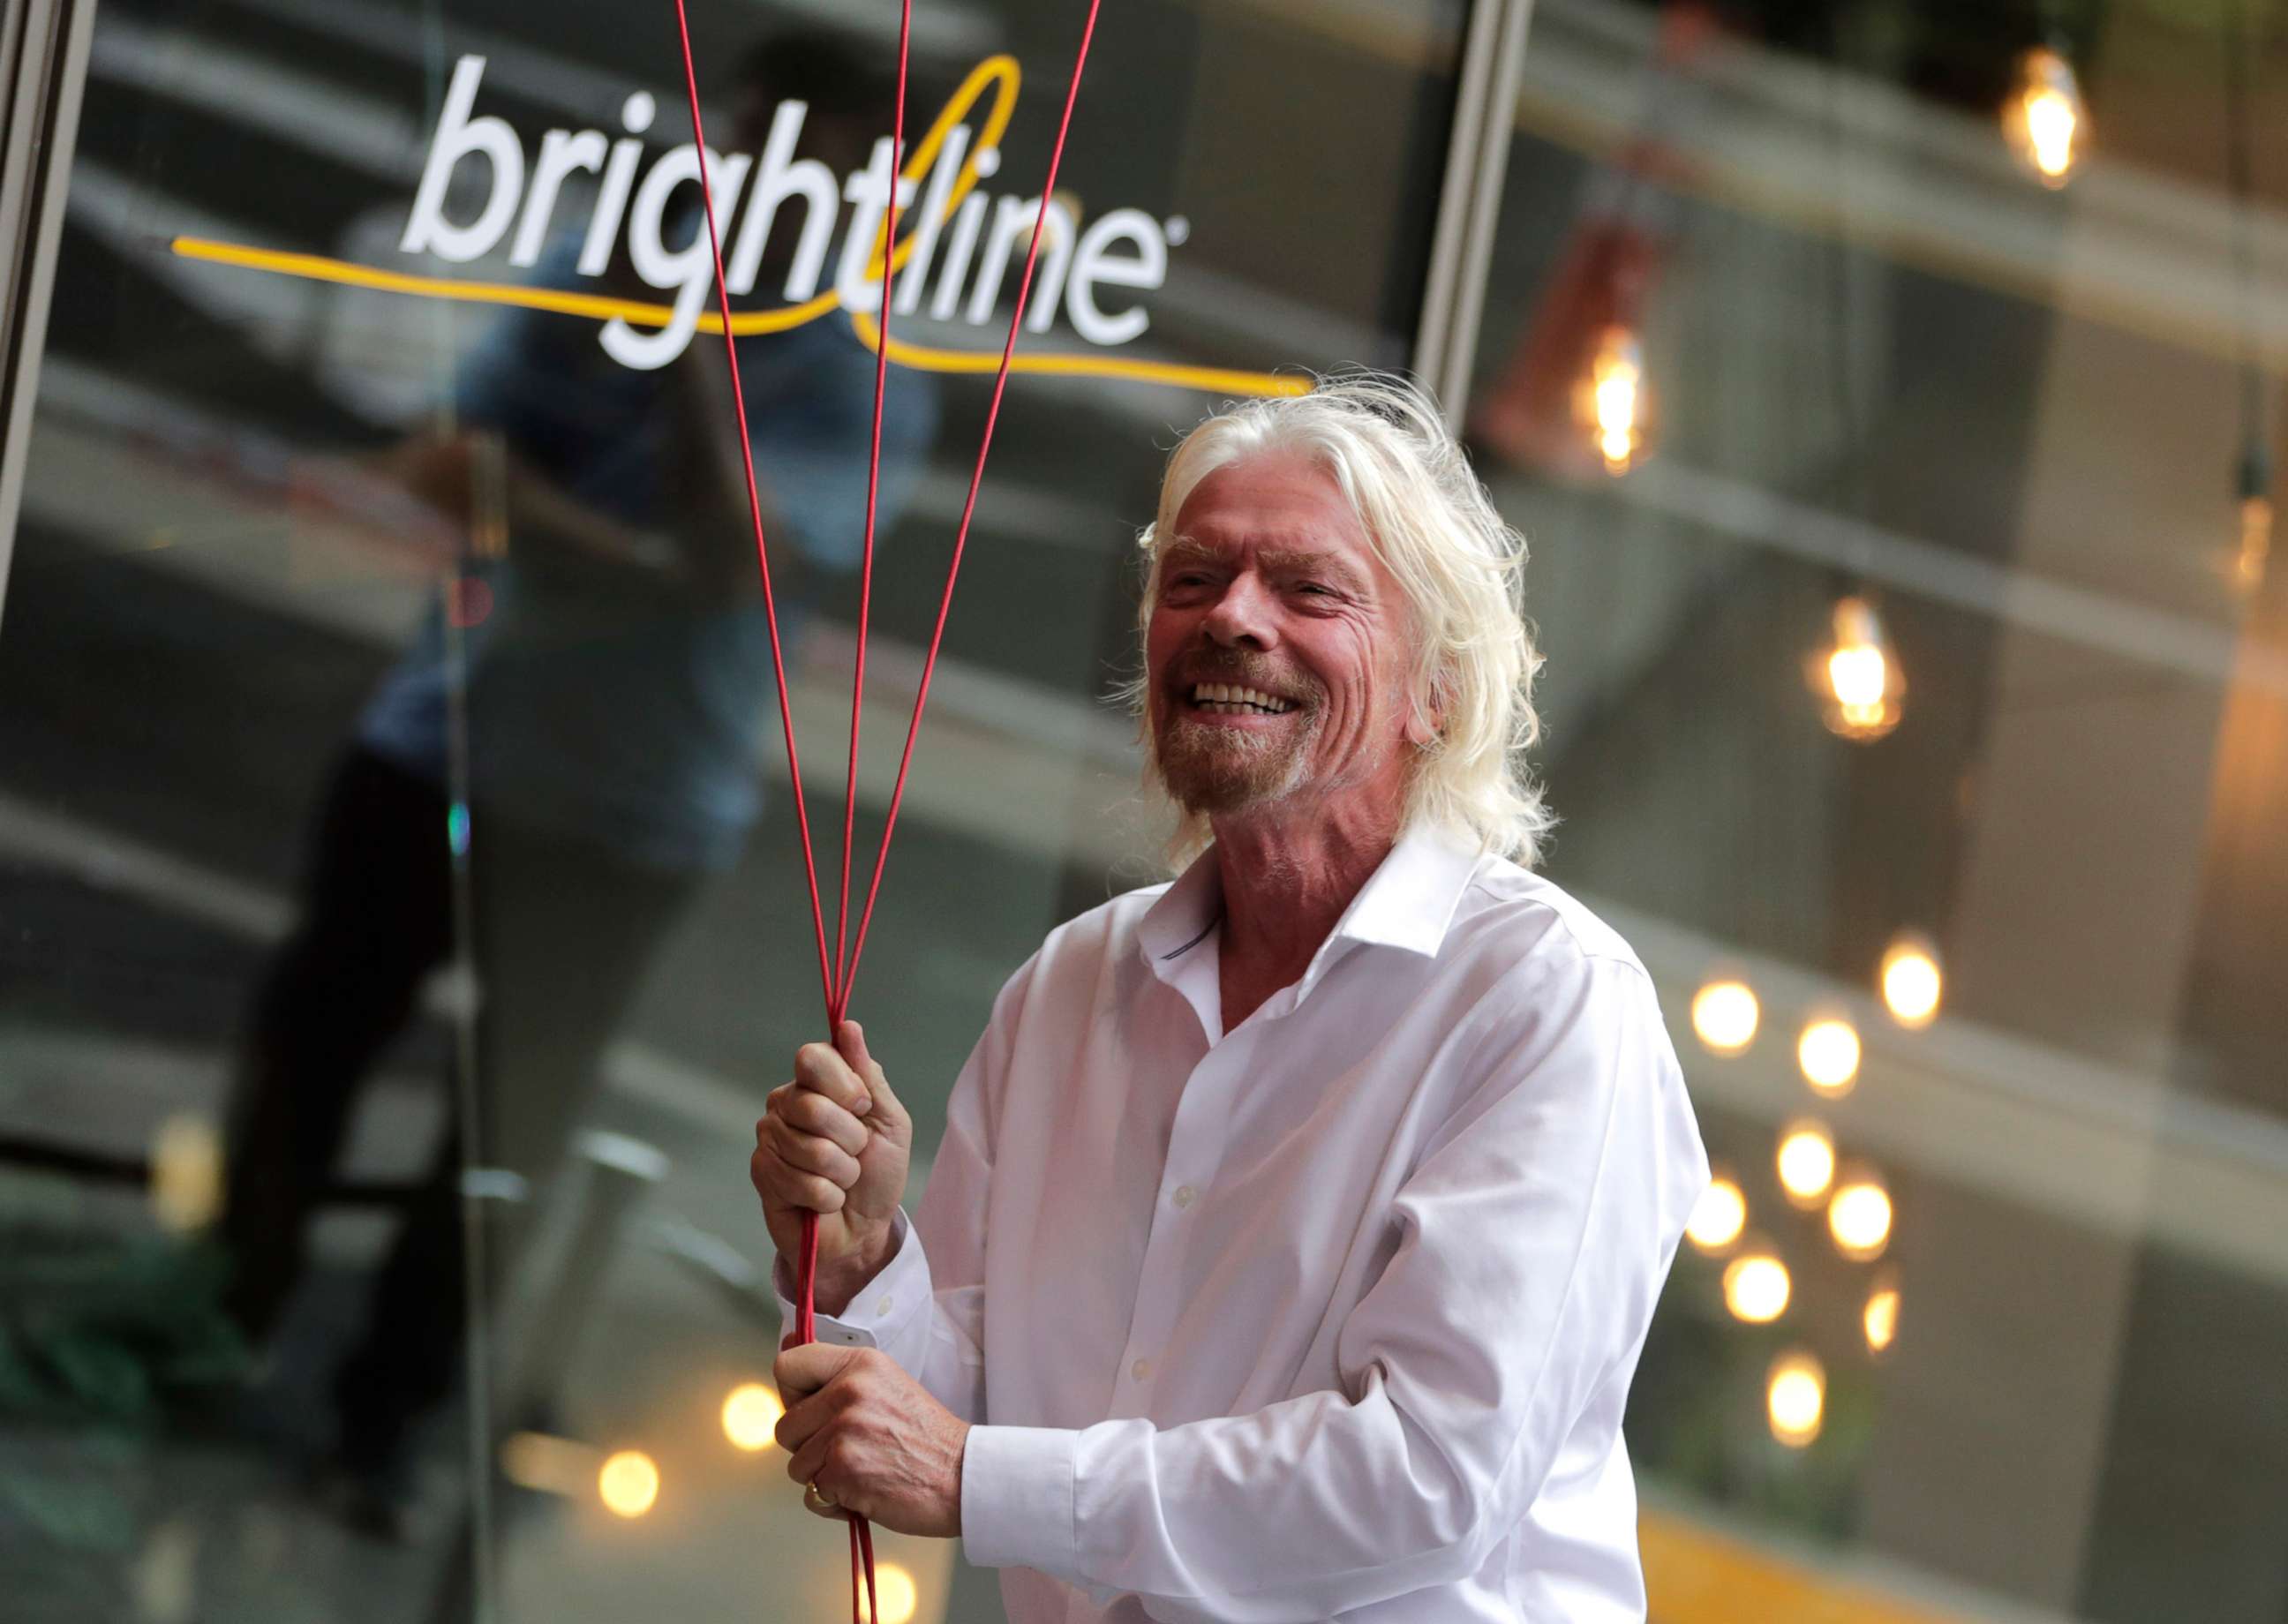 PHOTO: In this April 4, 2019, file photo, Richard Branson, of Virgin Group, prepares to unfurl a banner during a naming ceremony for the Brightline train station, to be renamed as Virgin MiamiCentral, in Miami.